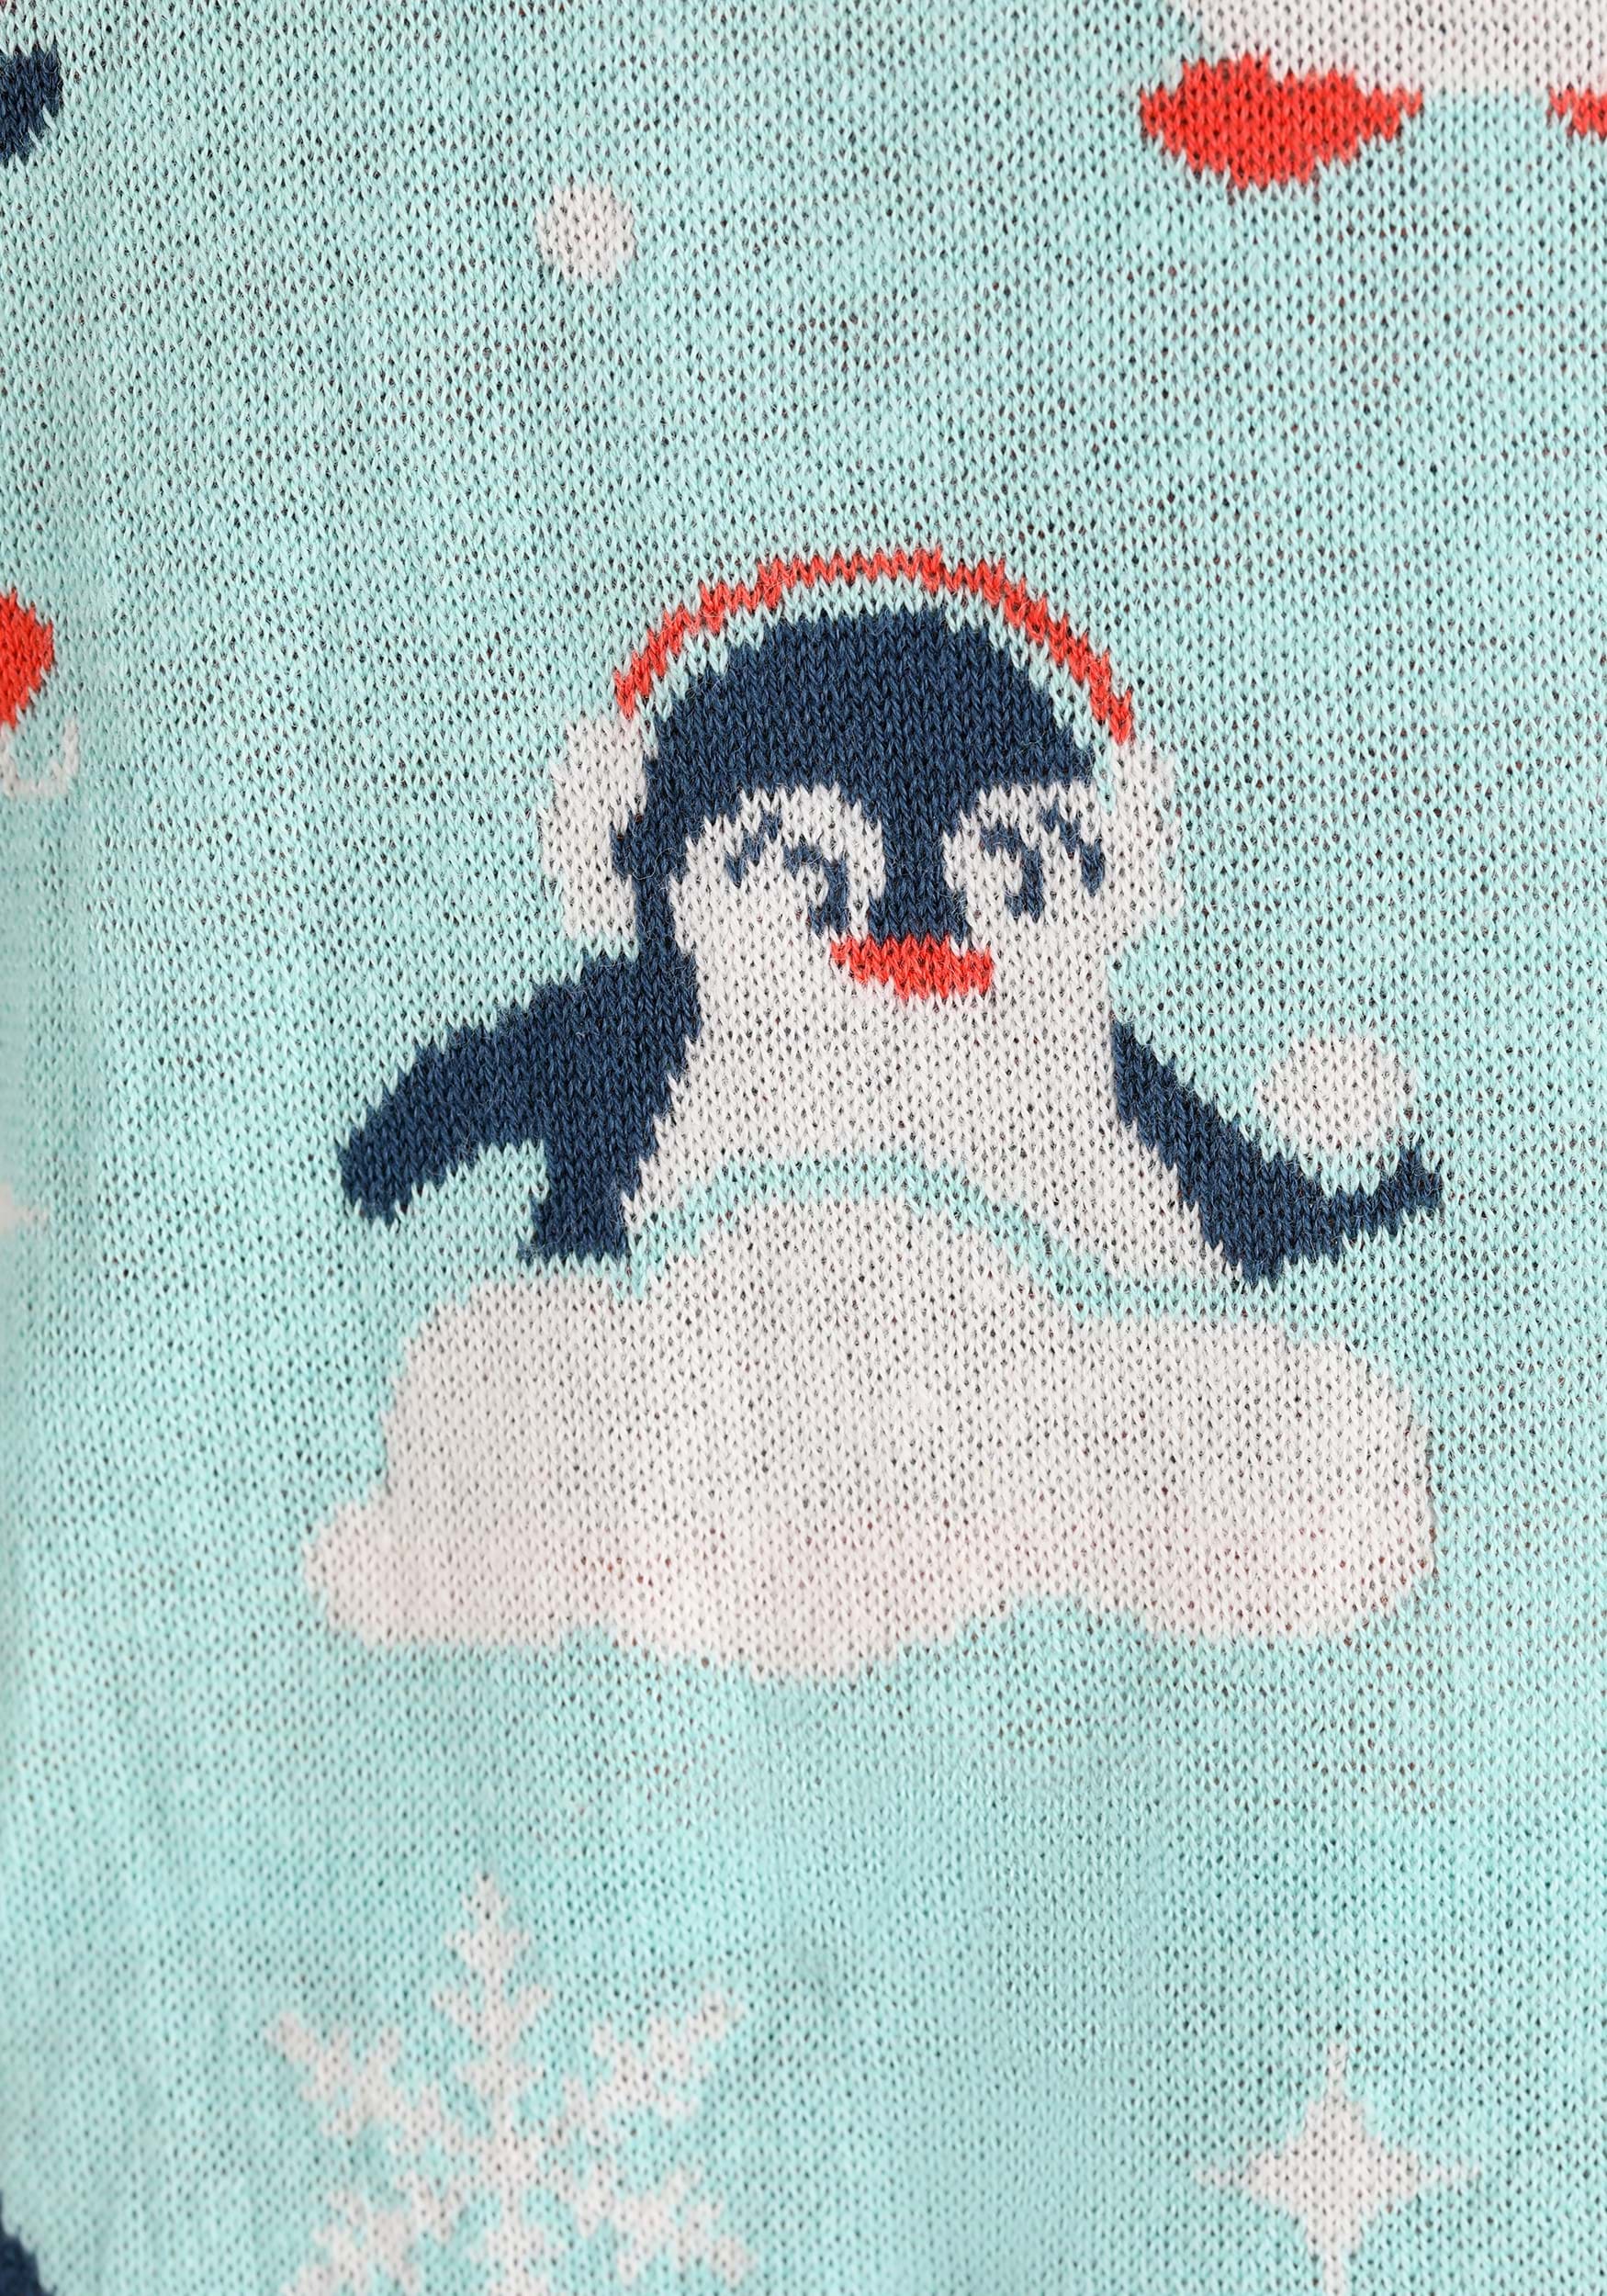  Christmas Penguin With Candy Christmas Ugly Christmas Sweater  Men Women,Penguin Ornament Sweatshirt,Cute Penguin Crewneck Shirt Party, Penguin Pattern Long-Sleeve Sweater,Penguin Crewneck Shirt,UH2266 :  Clothing, Shoes & Jewelry